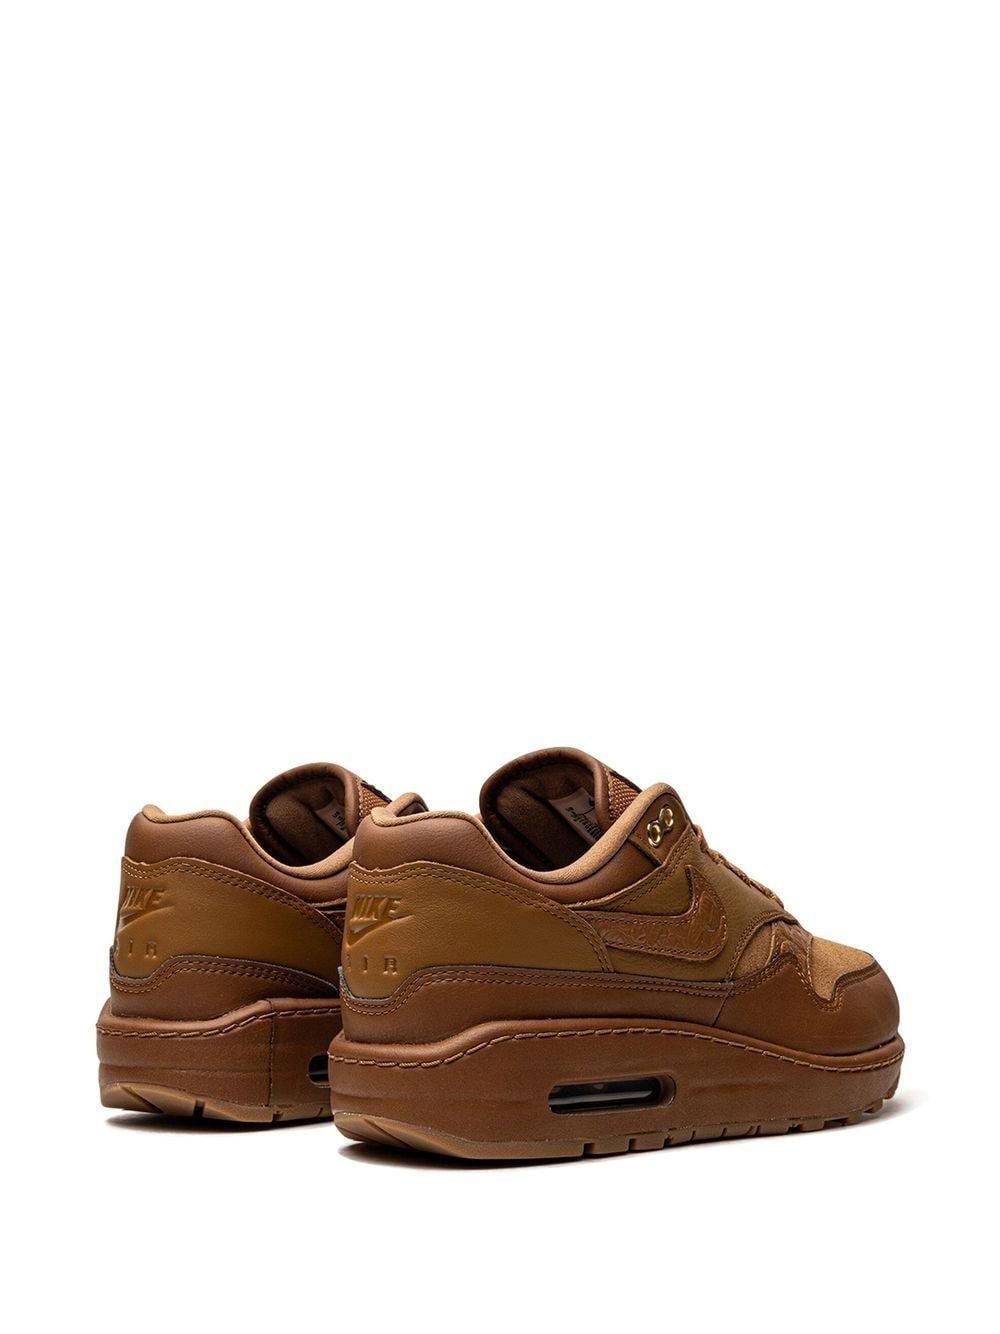 Shop Nike Air Max 1 '87 "luxe Ale Brown" Sneakers